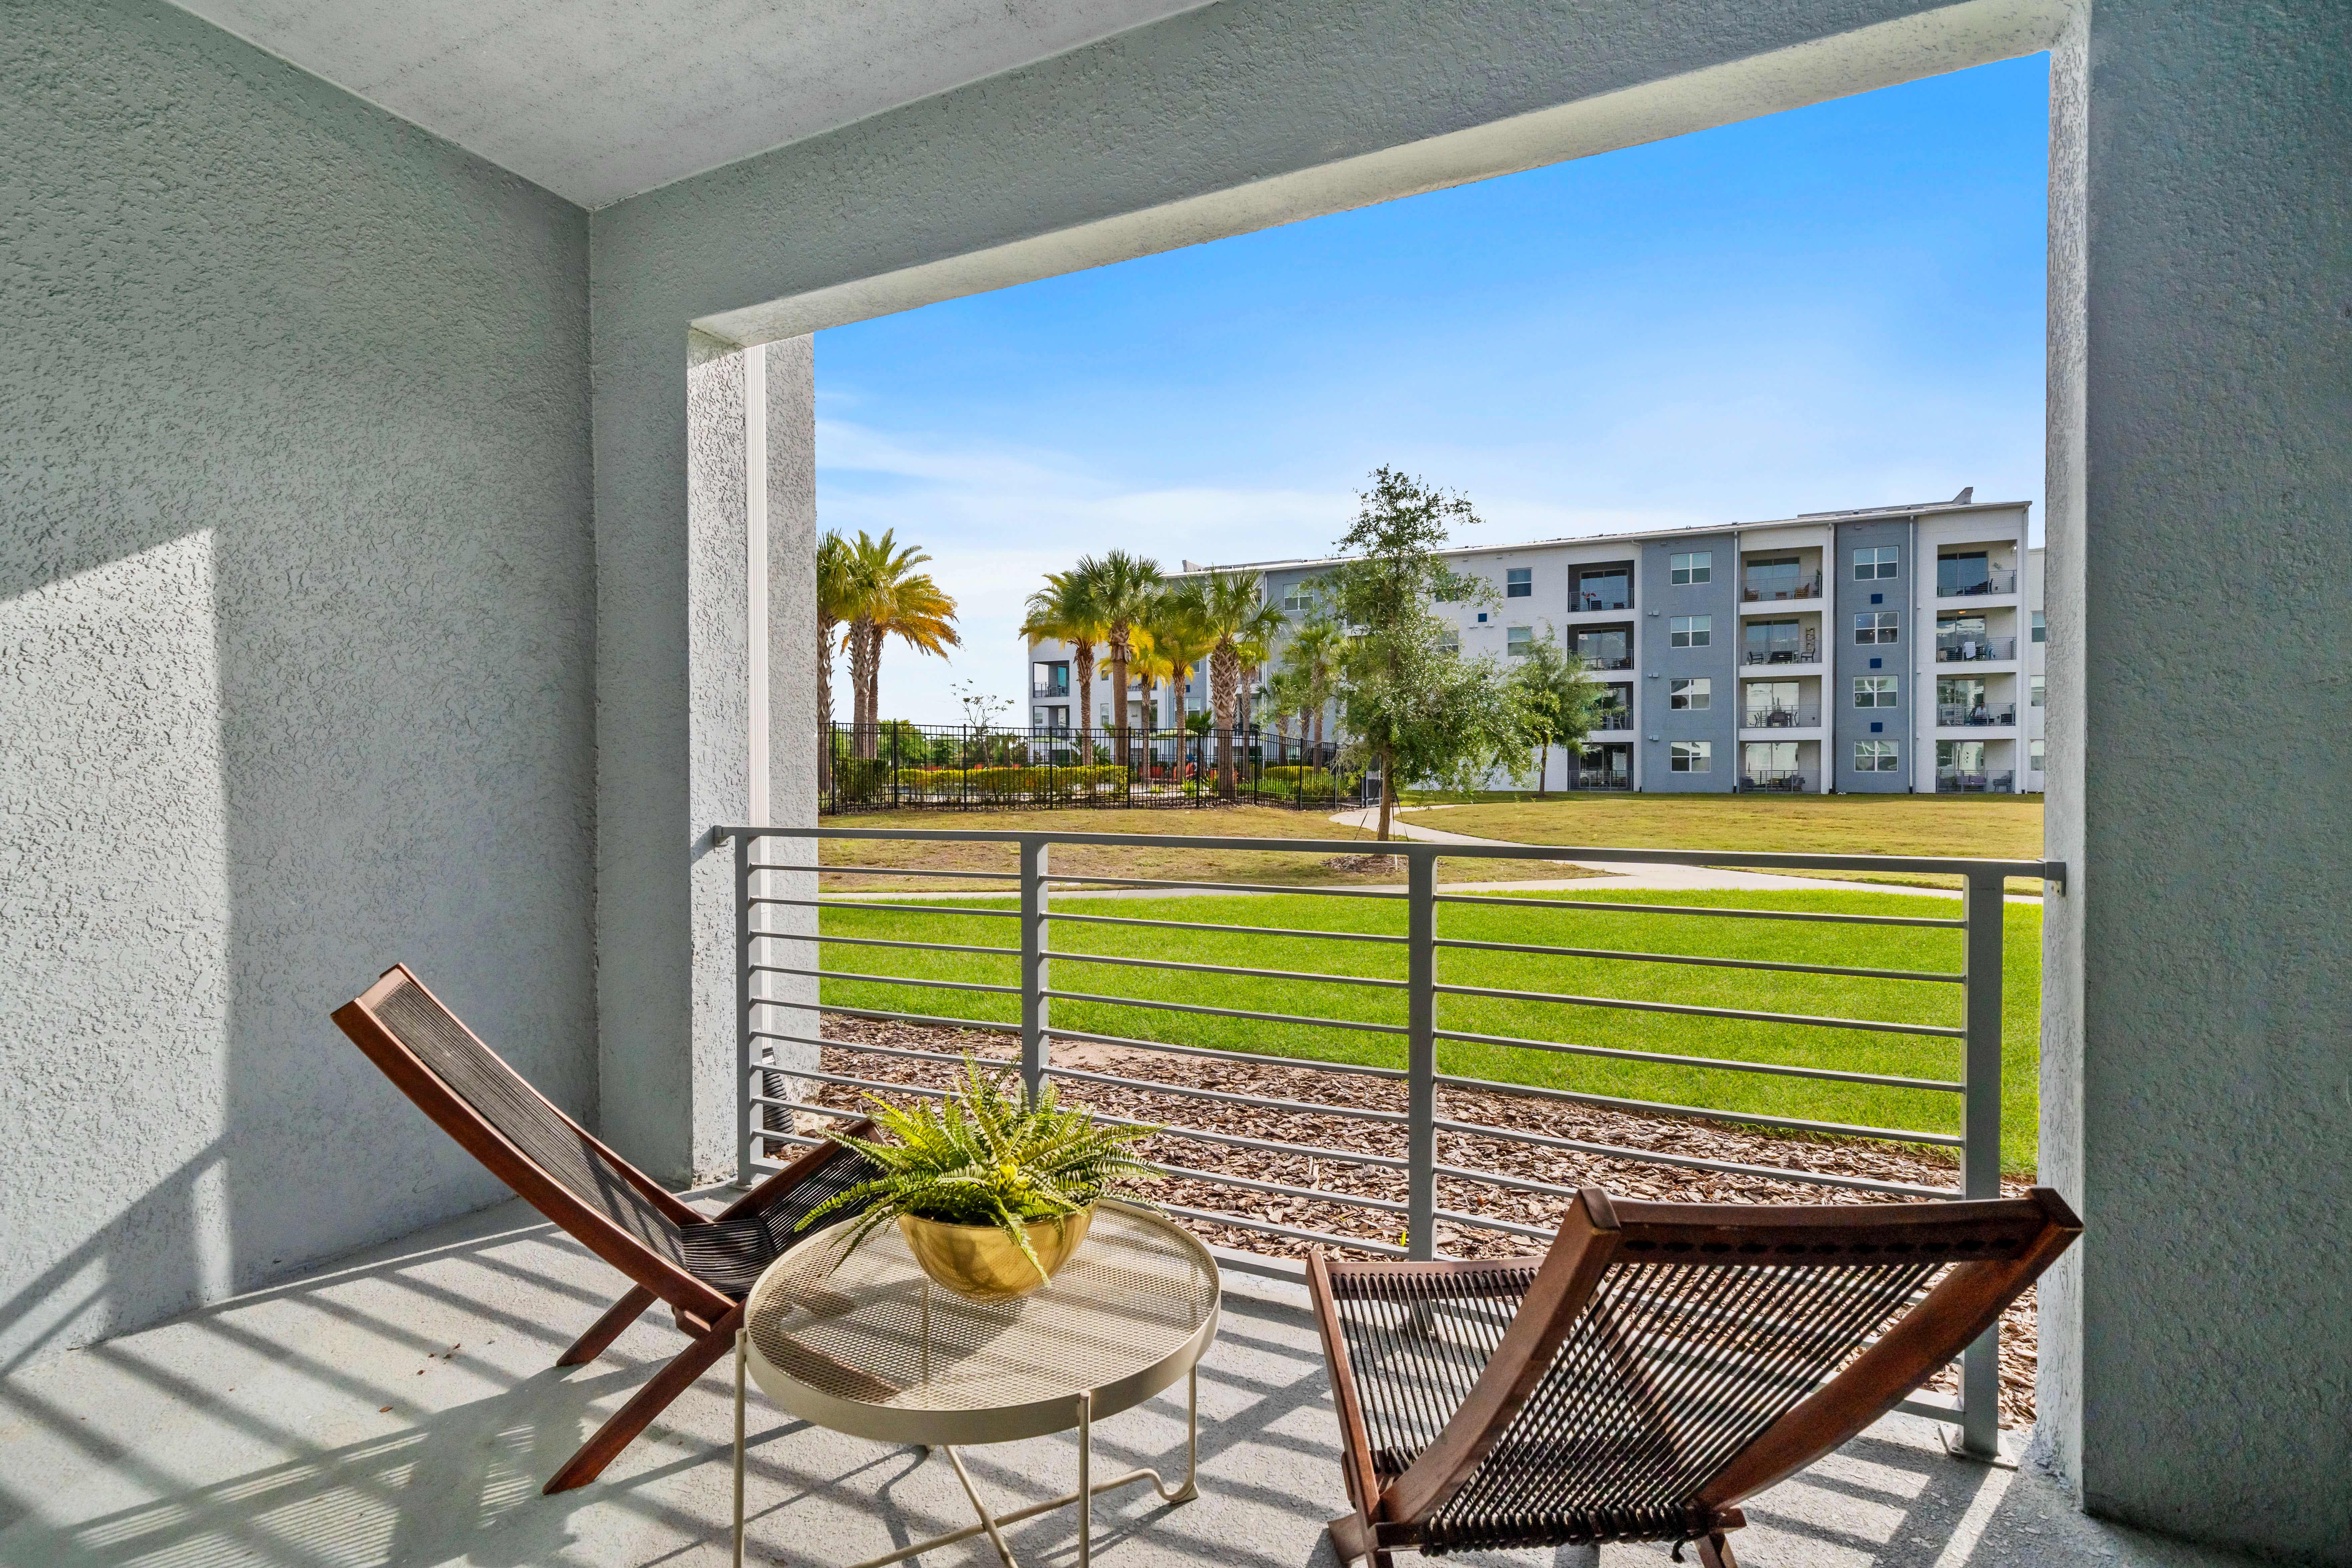 Superb Balcony of the Condo in Kissimmee Florida - Access to a private balcony for extended relaxation - Cozy outdoor retreat with seating